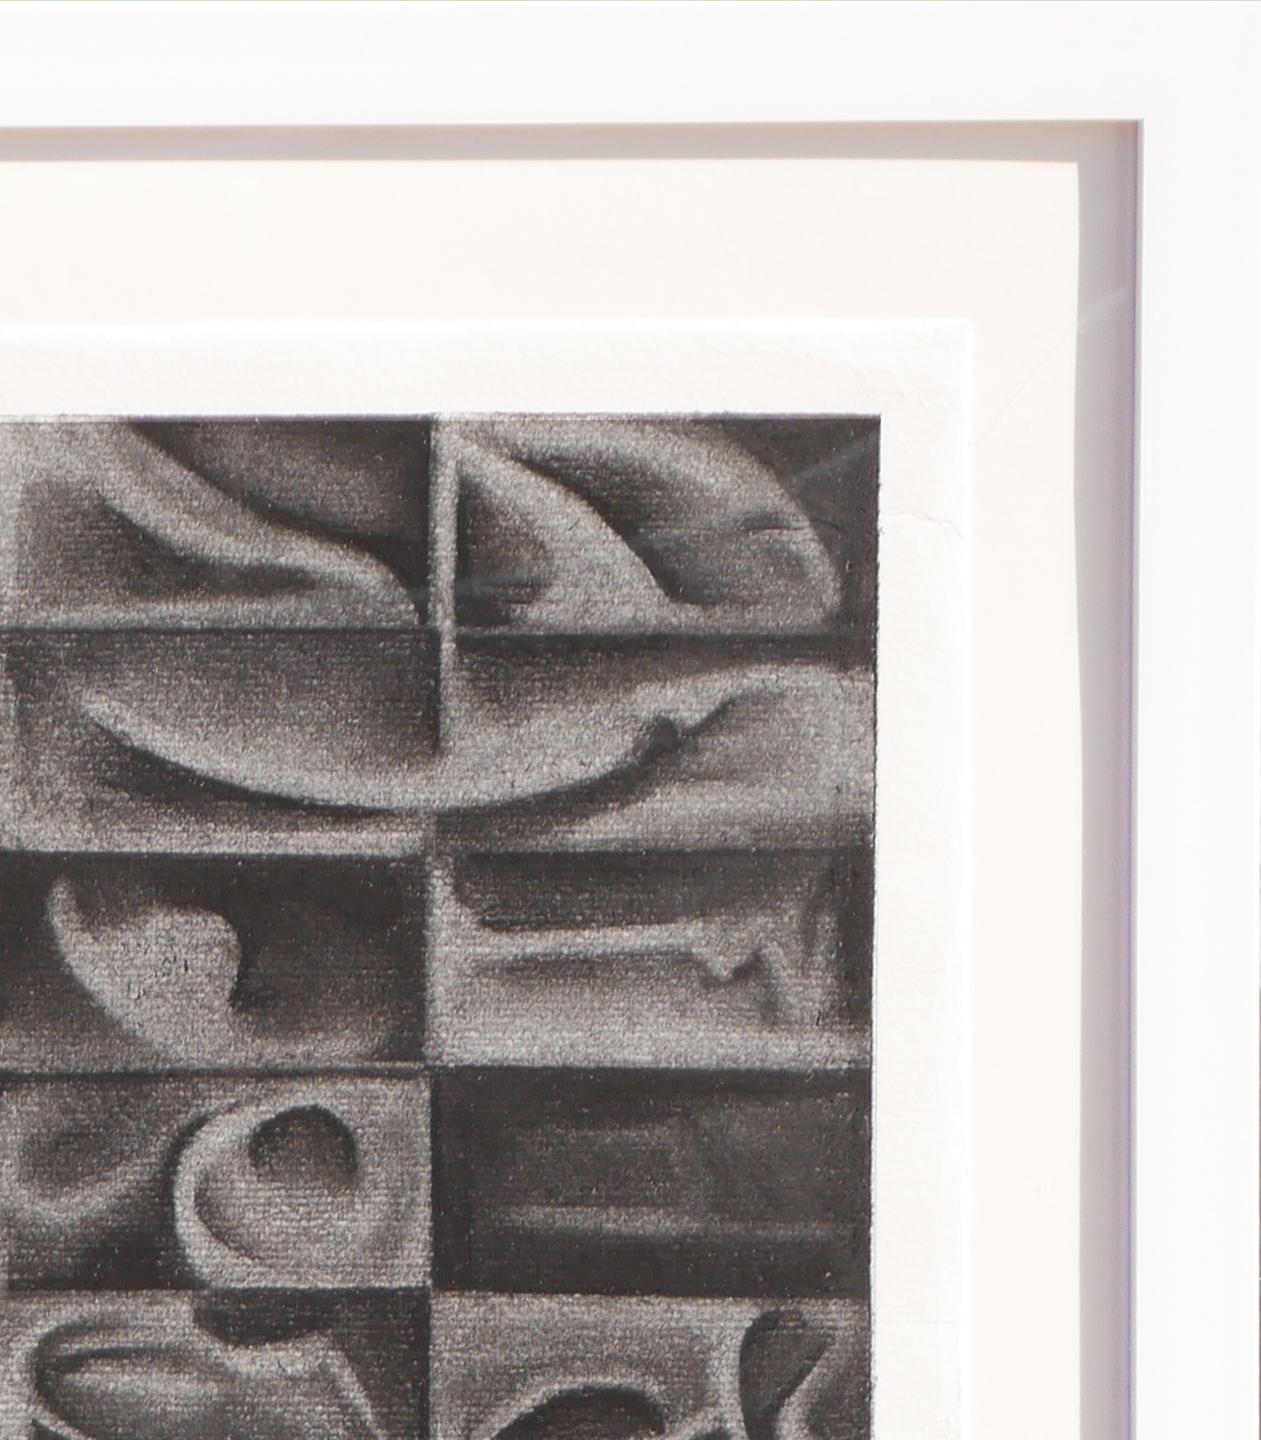 Contemporary black and white geometric charcoal drawing by artist James McCahon. This drawing features a balanced composition of rectangular shapes with rounded circles and lines. Signed and dated on the bottom right corner. Currently hung in a